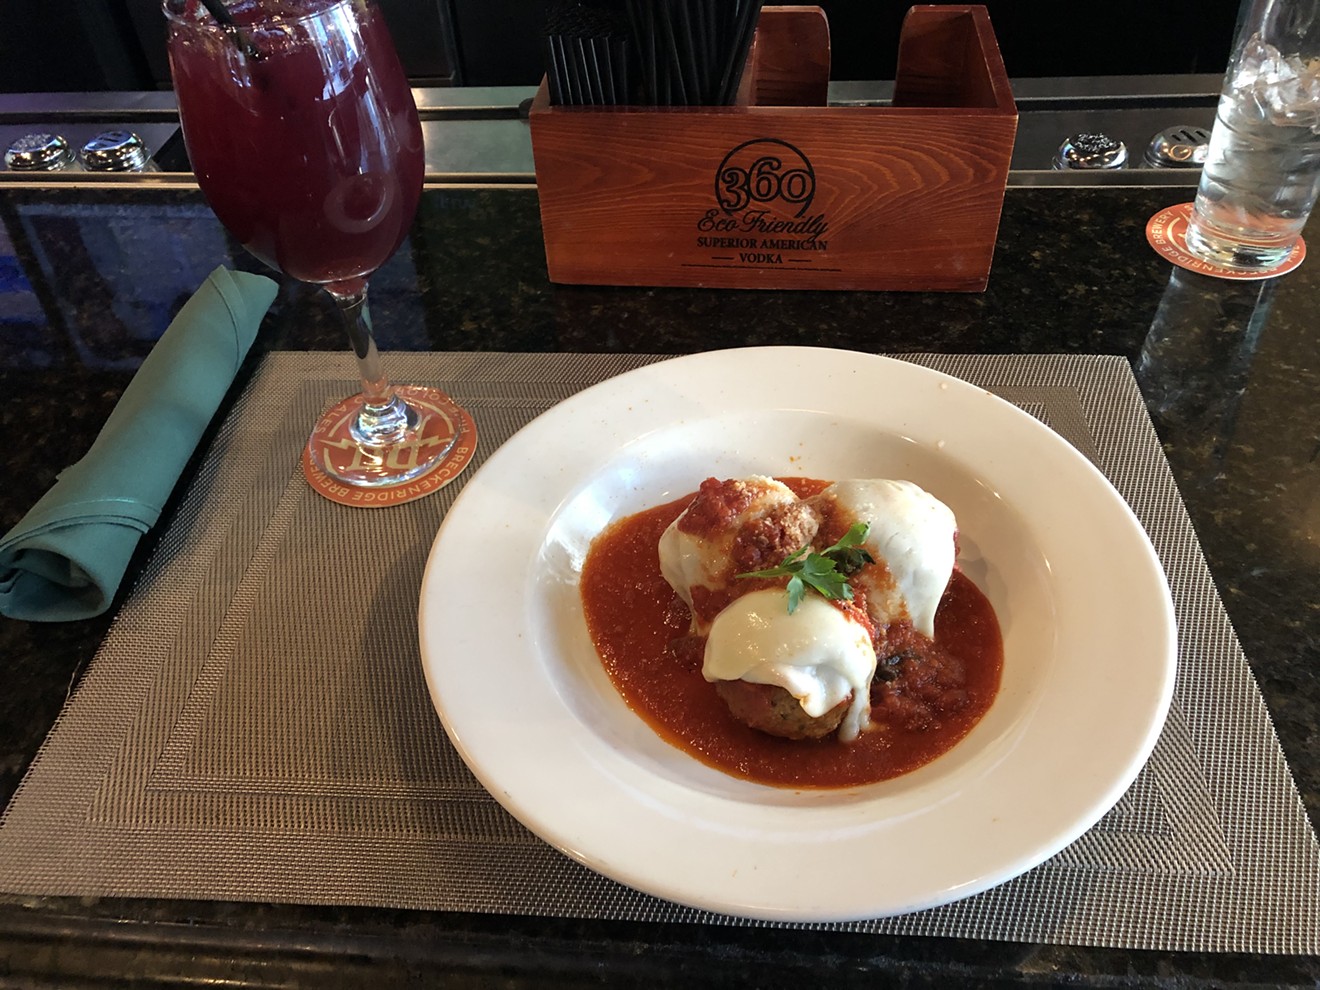 $6 meatballs and a $4 glass of sangria can improve anyone's day.